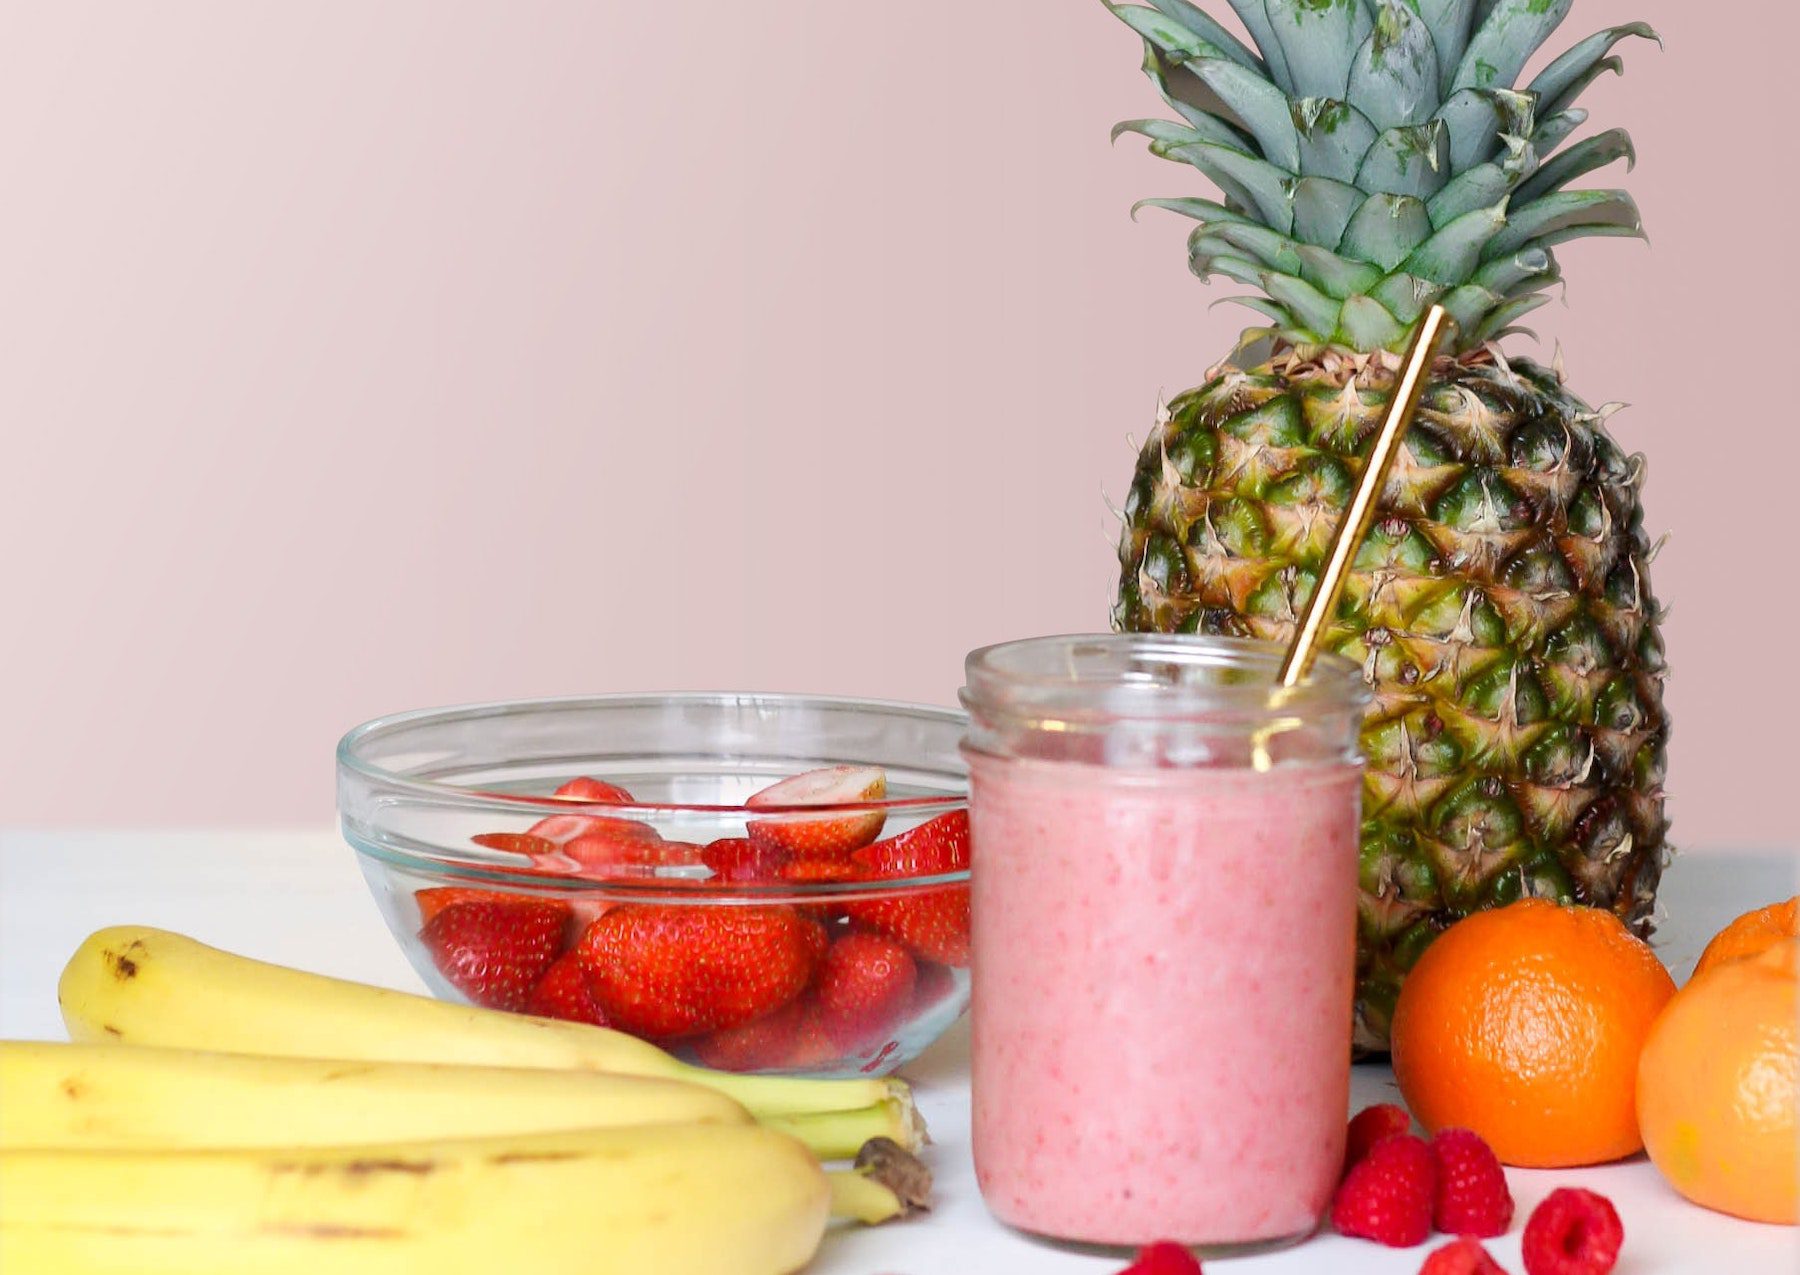 Pink smoothie in a mason jar in front of pineapple, bananas, strawberries, raspberries, and oranges against a pale pink wall.